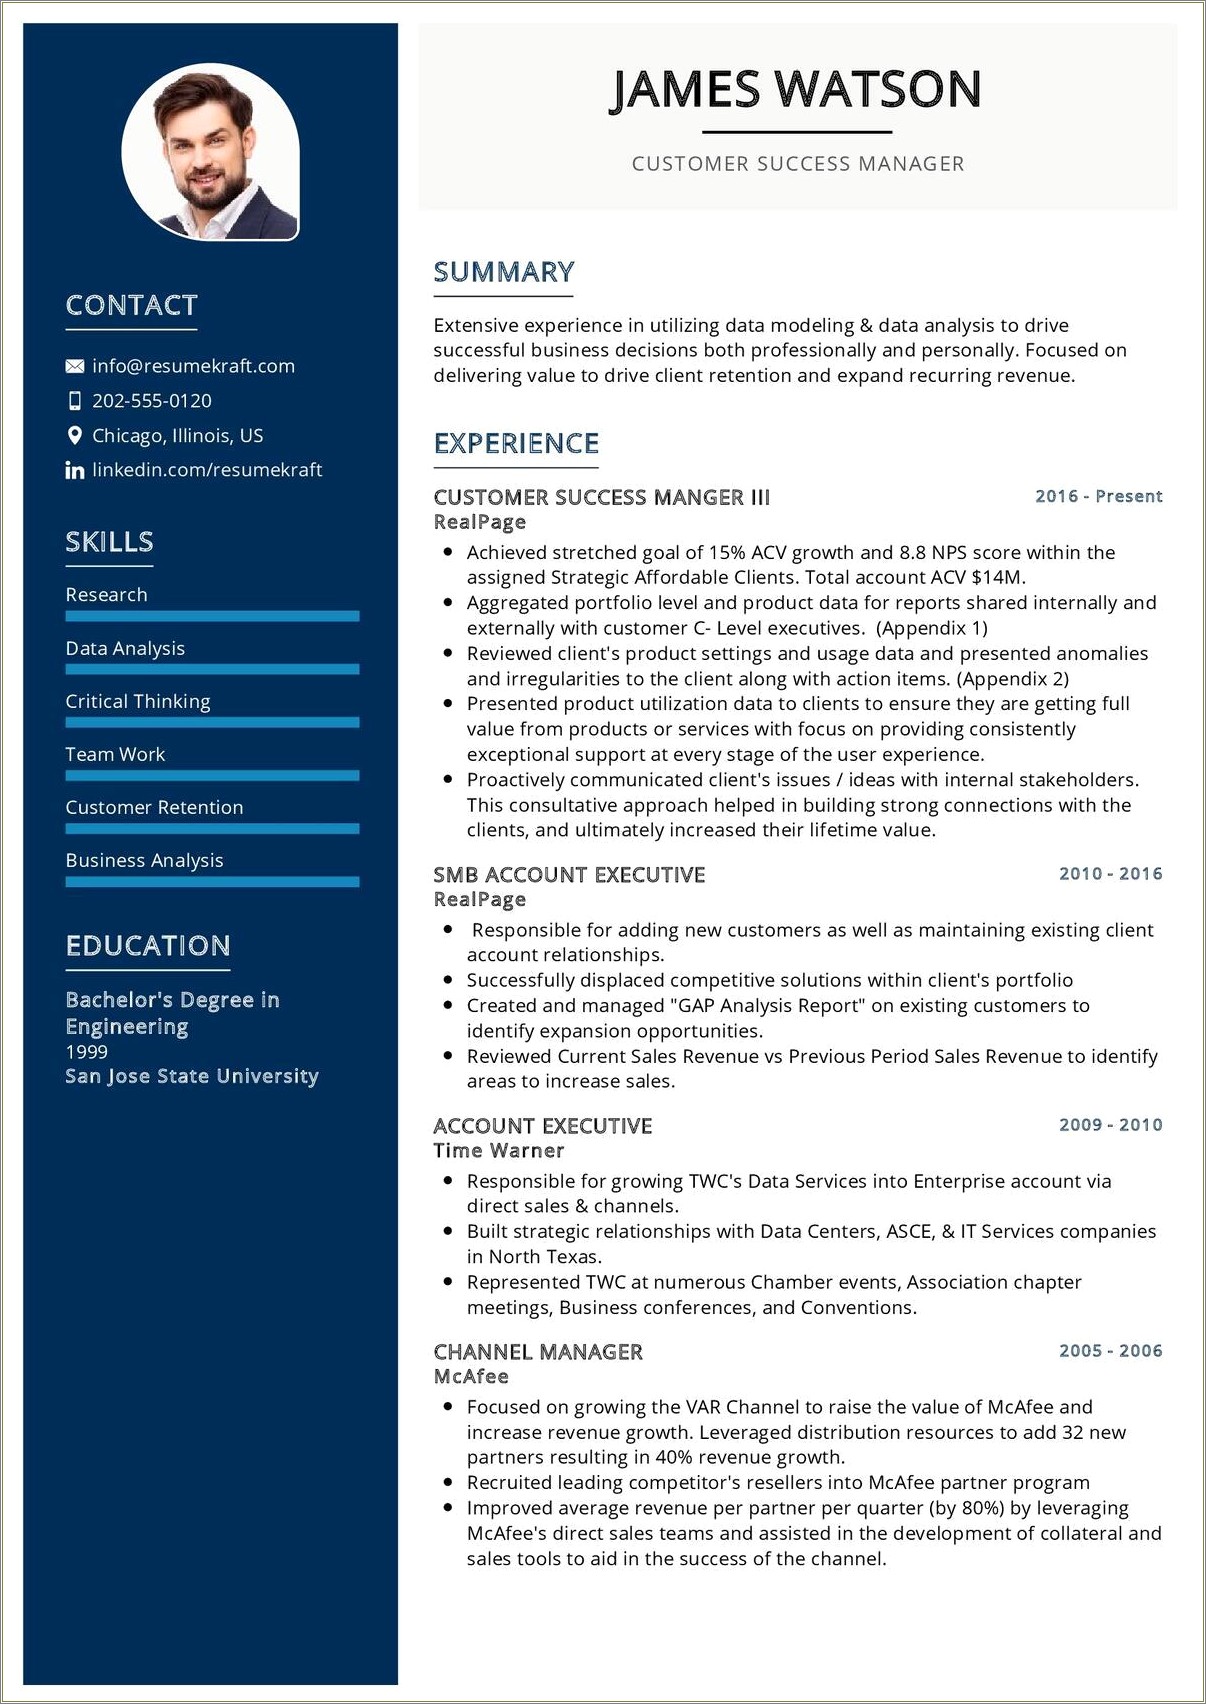 Customer Success Manager Objective Resume